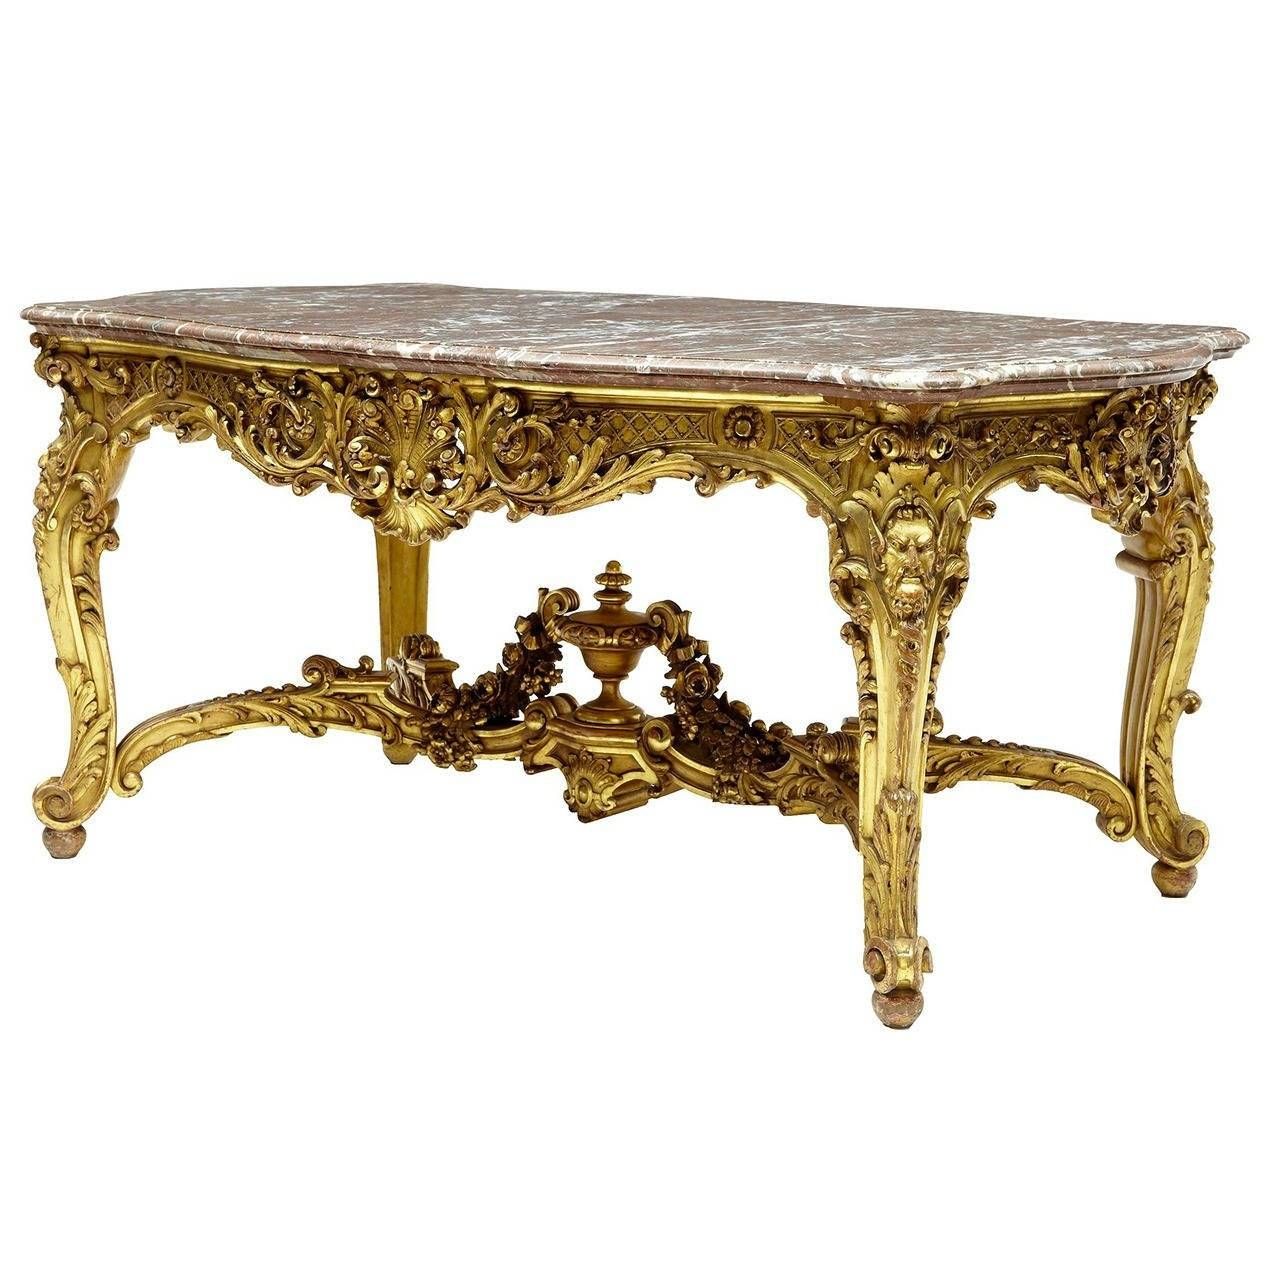 Stunning 19th Century French Carved Wood Gilt Baroque Center Table For Baroque Coffee Tables (View 10 of 11)